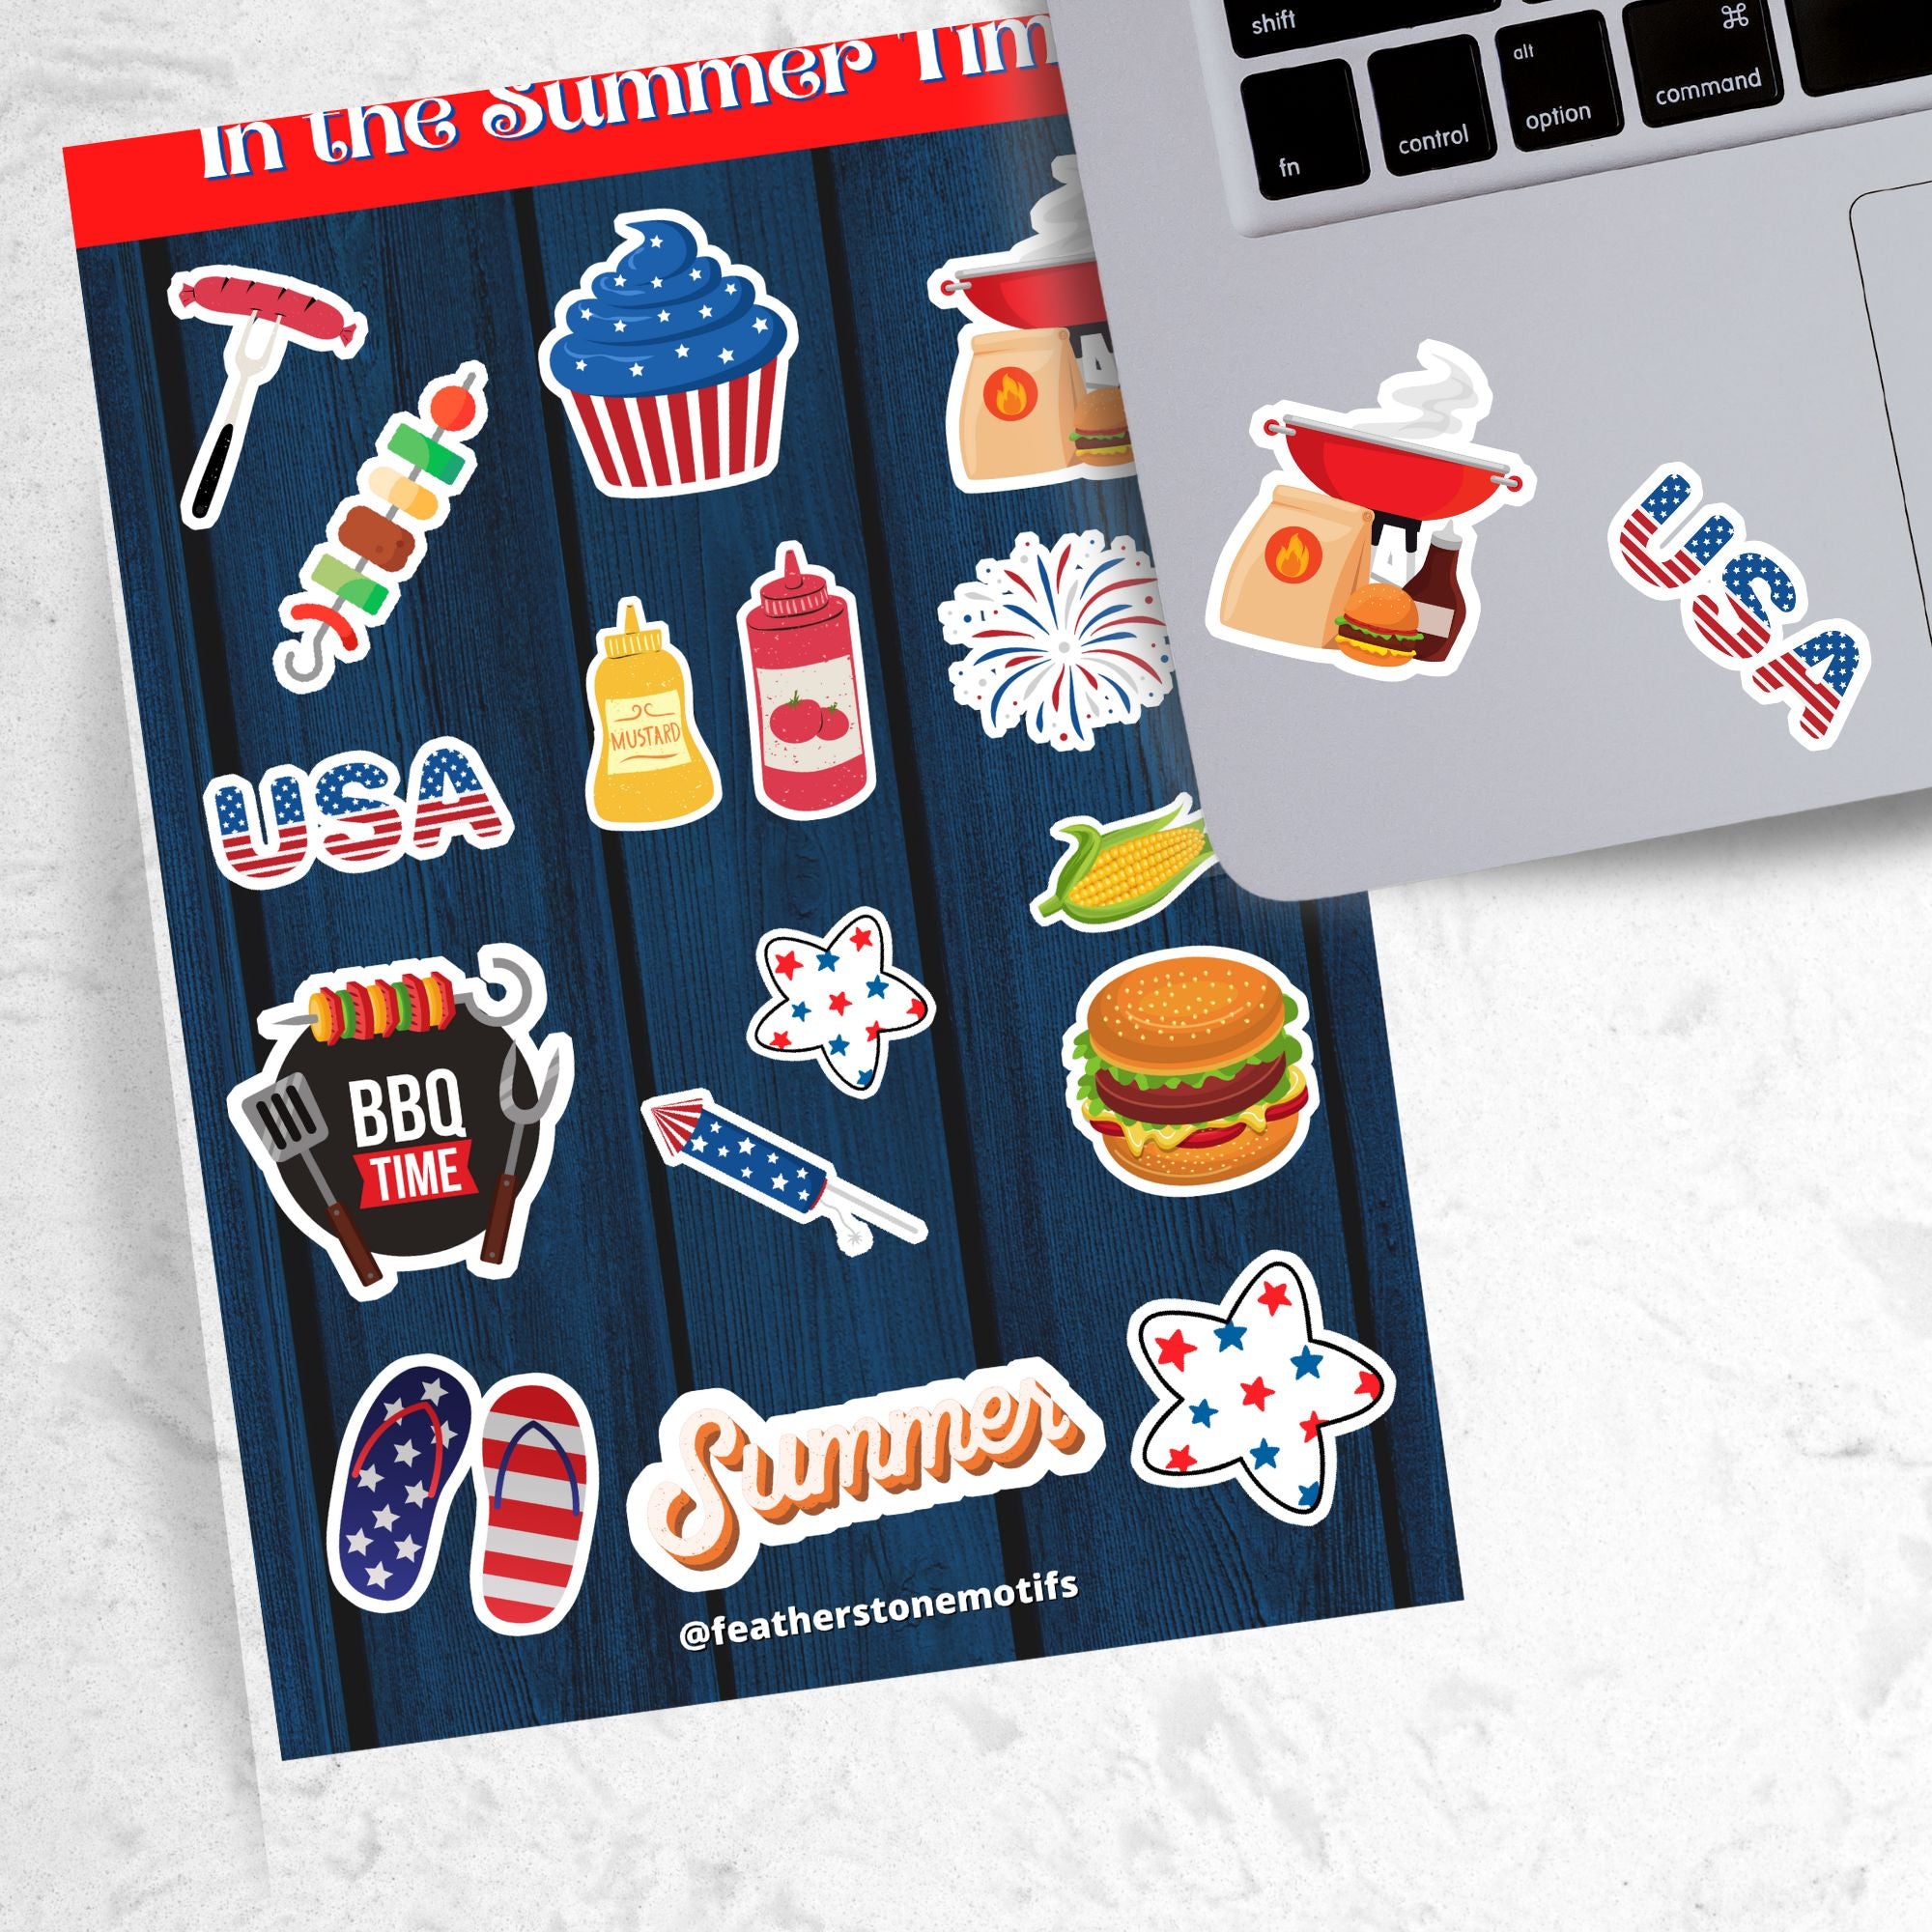 Celebrate summer, and the 4th of July in the USA. This sticker sheet has all of your favorite summer time foods like BBQing, burgers, hot dogs, and corn on the cob. Plus fireworks and red, white, and blue images. This image has the sticker sheet next to an open laptop with USA and a summer grill stickers.